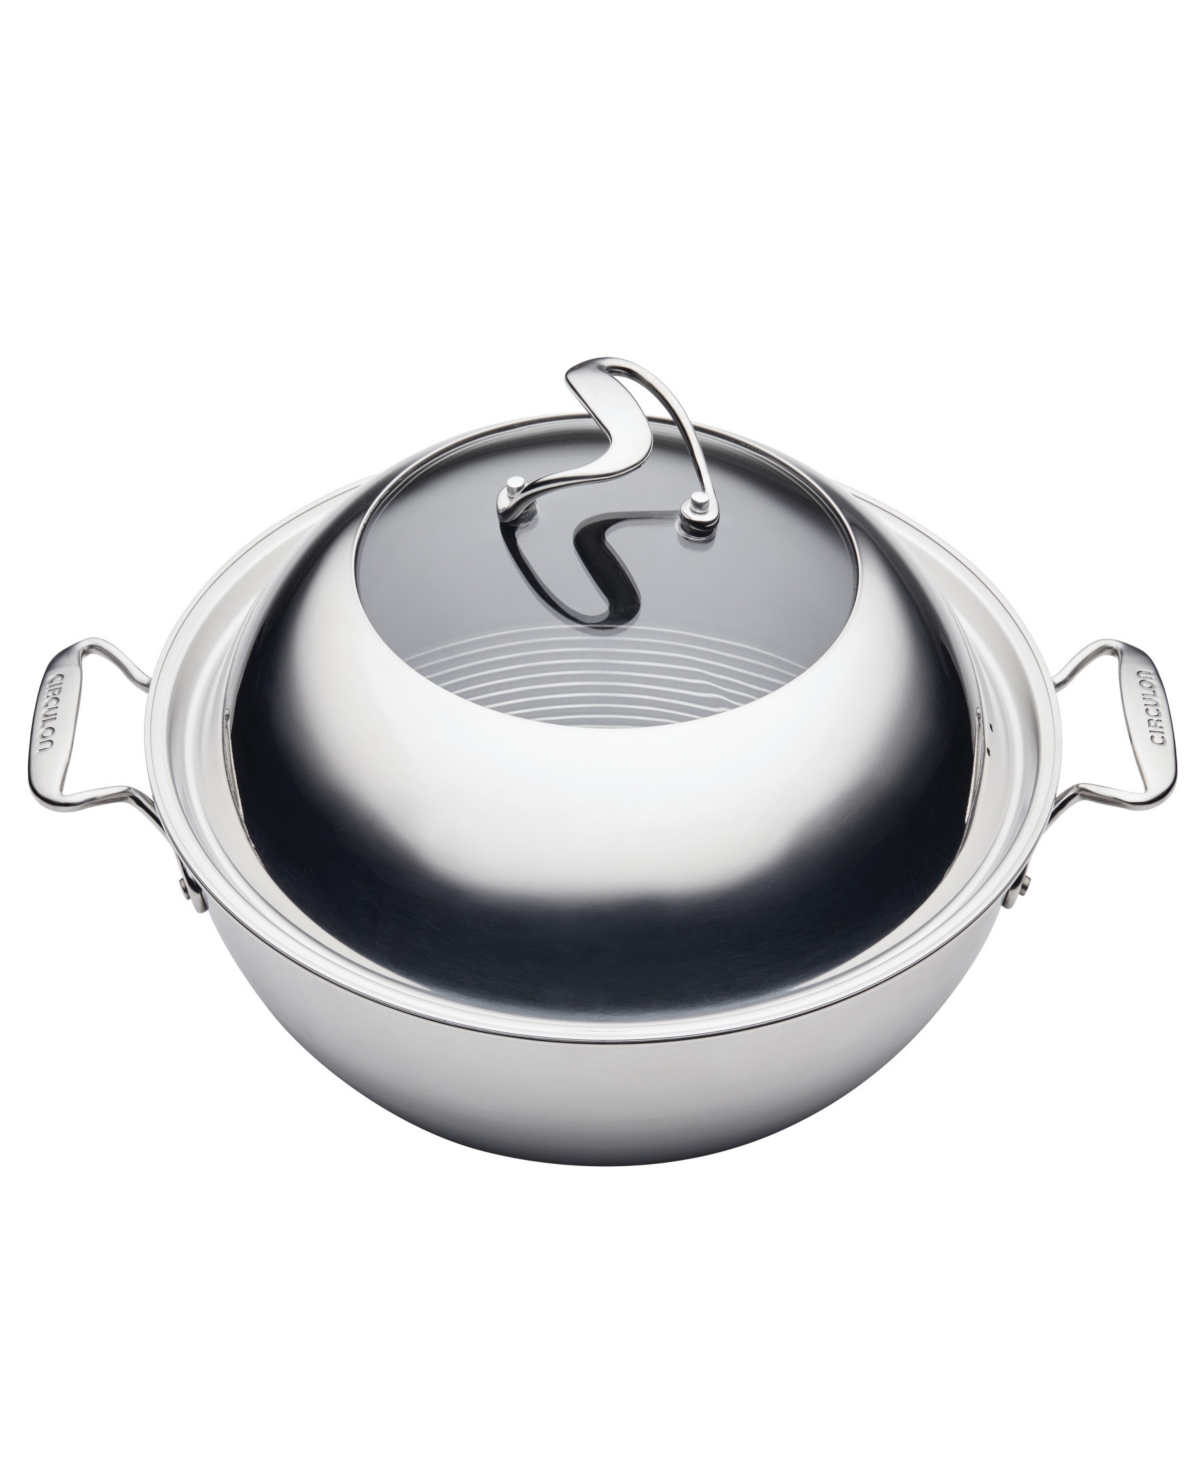 Circulon Clad Stainless Steel 14" Induction Wok With Glass Lid And Hybrid Steelshield And Non-stick Technolog